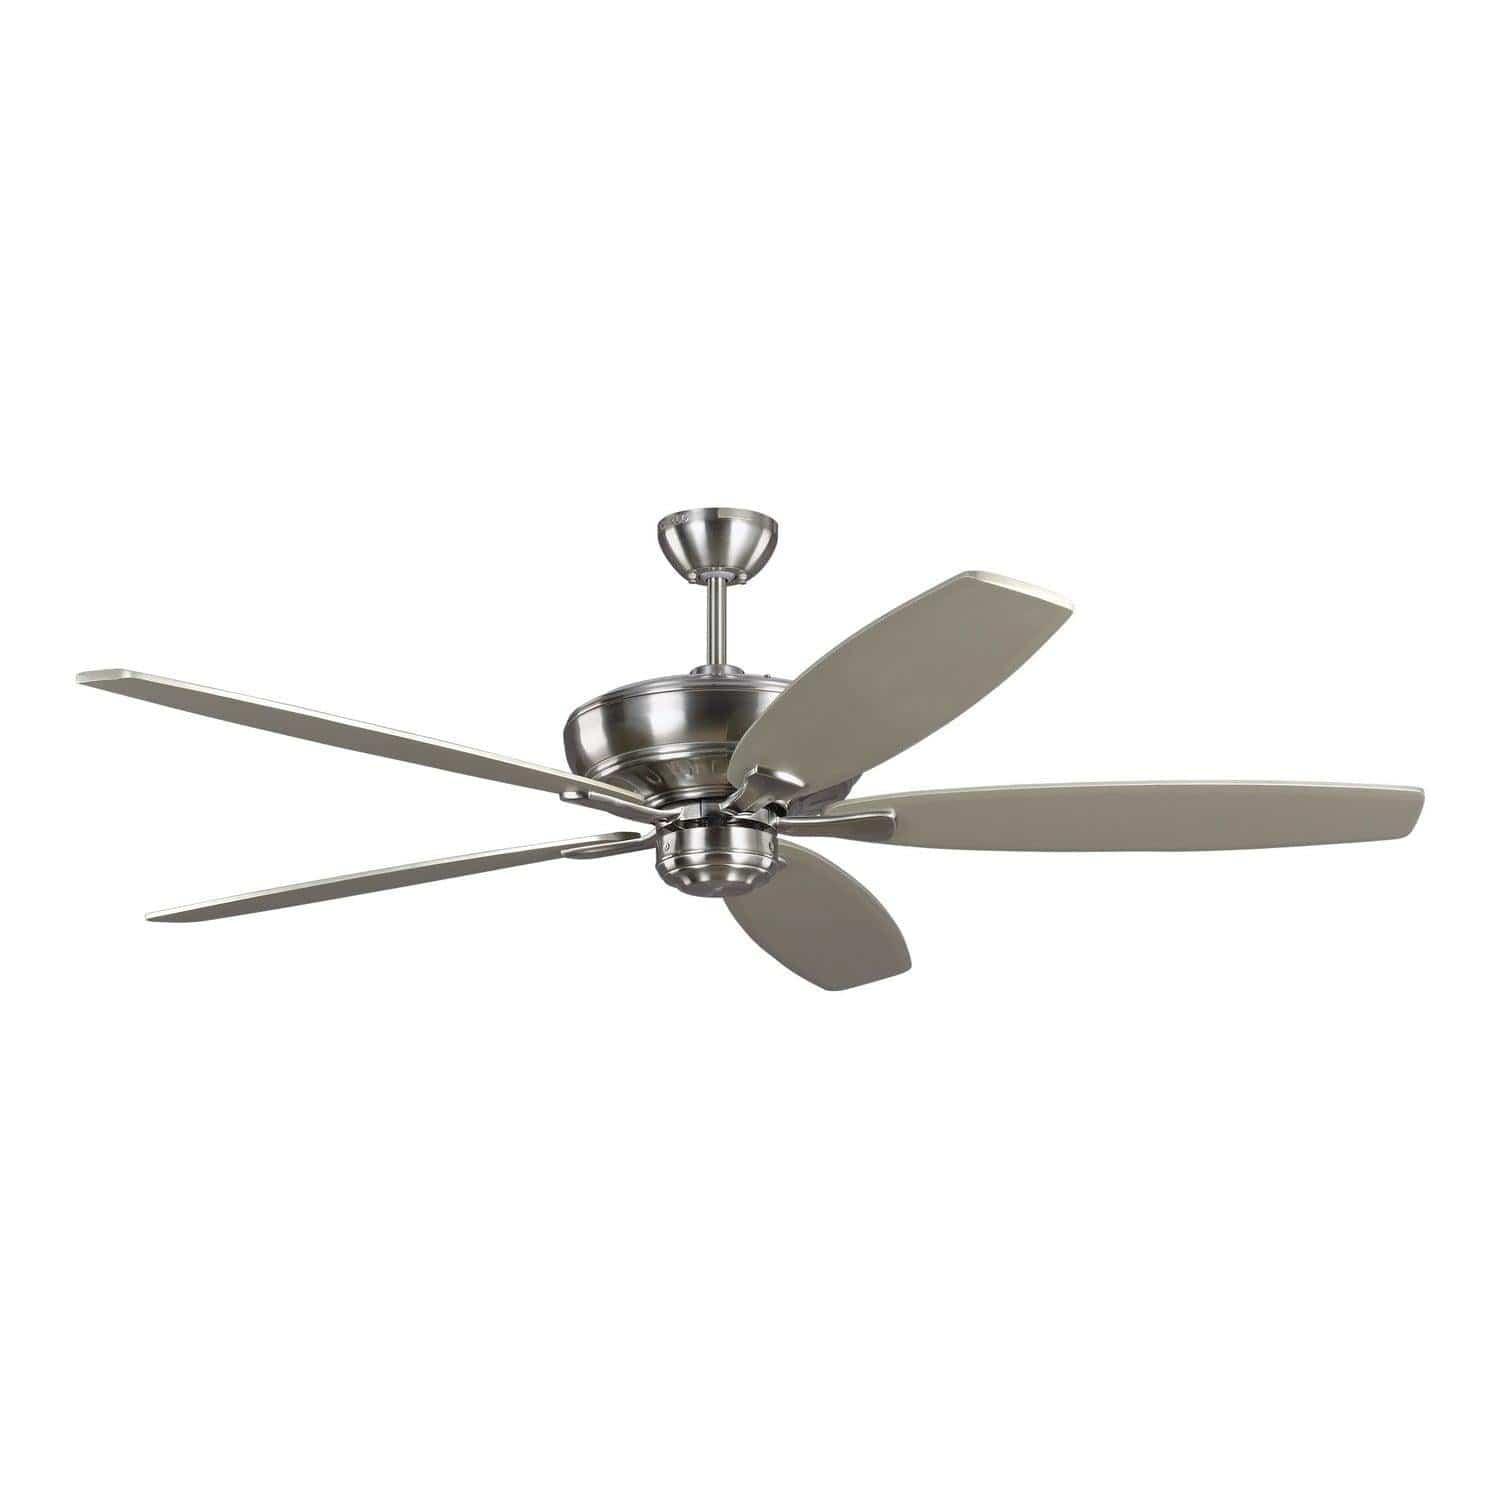 Visual Comfort Fan Collection - Dover Ceiling Fan - 5DVR60BS | Montreal Lighting & Hardware